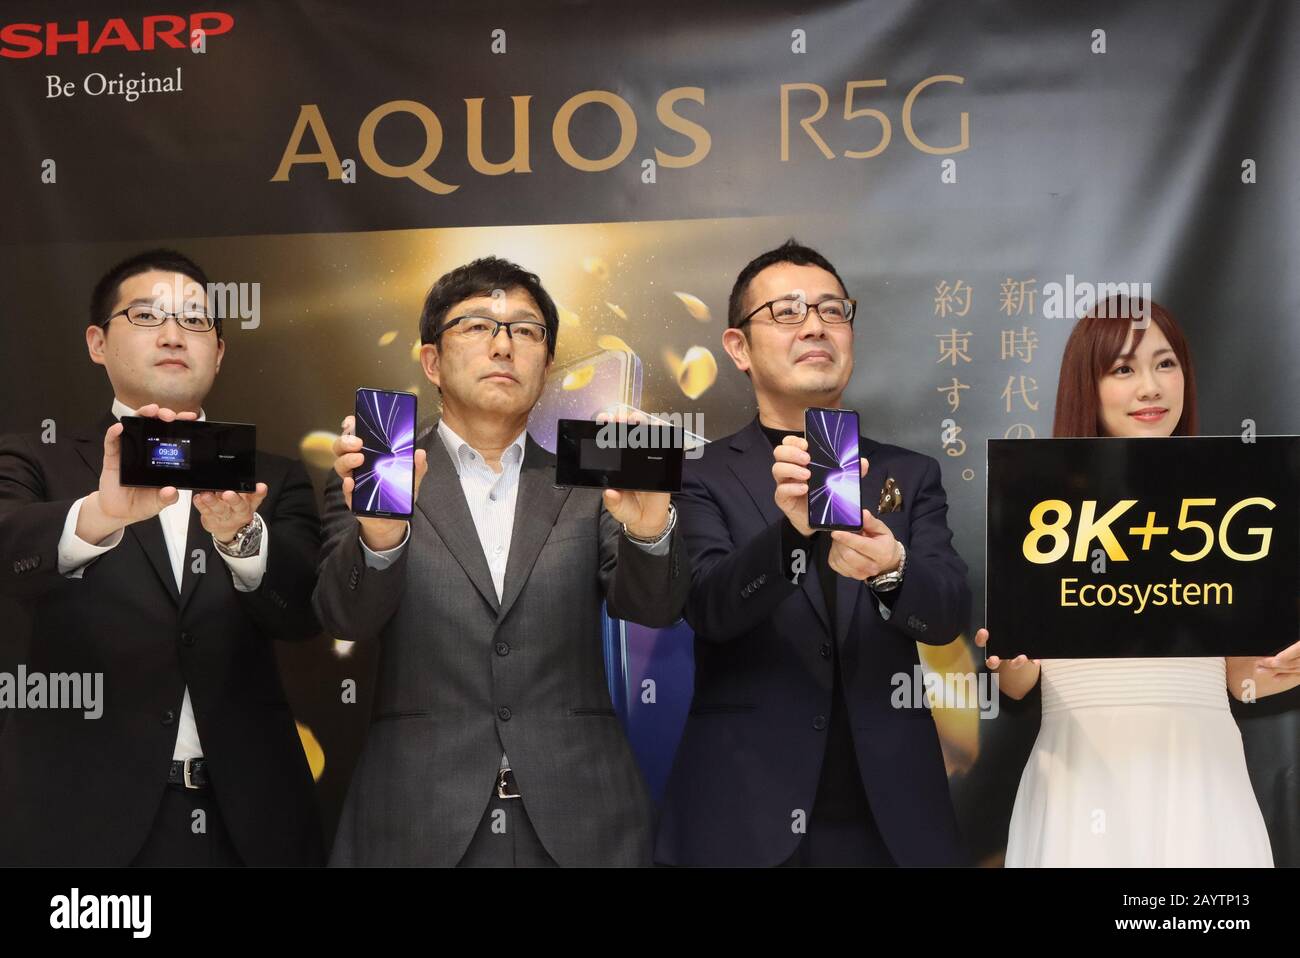 Tokyo, Japan. 17th Feb, 2020. Japan's electronics giant Sharp unveils the new 5G smartphone 'AQUOS R5G' equipped with Qualcomm's Snapdragon 865 on its CPU, 6.5-inch sized IGZO LCD display and three cameras with a 3D sensor and the new 5G mobile router at the company's Tokyo office in Tokyo on Monday, February 17, 2020. Sharp will put Japan's first 5G smartphone on the market in this spring. Credit: Yoshio Tsunoda/AFLO/Alamy Live News Stock Photo